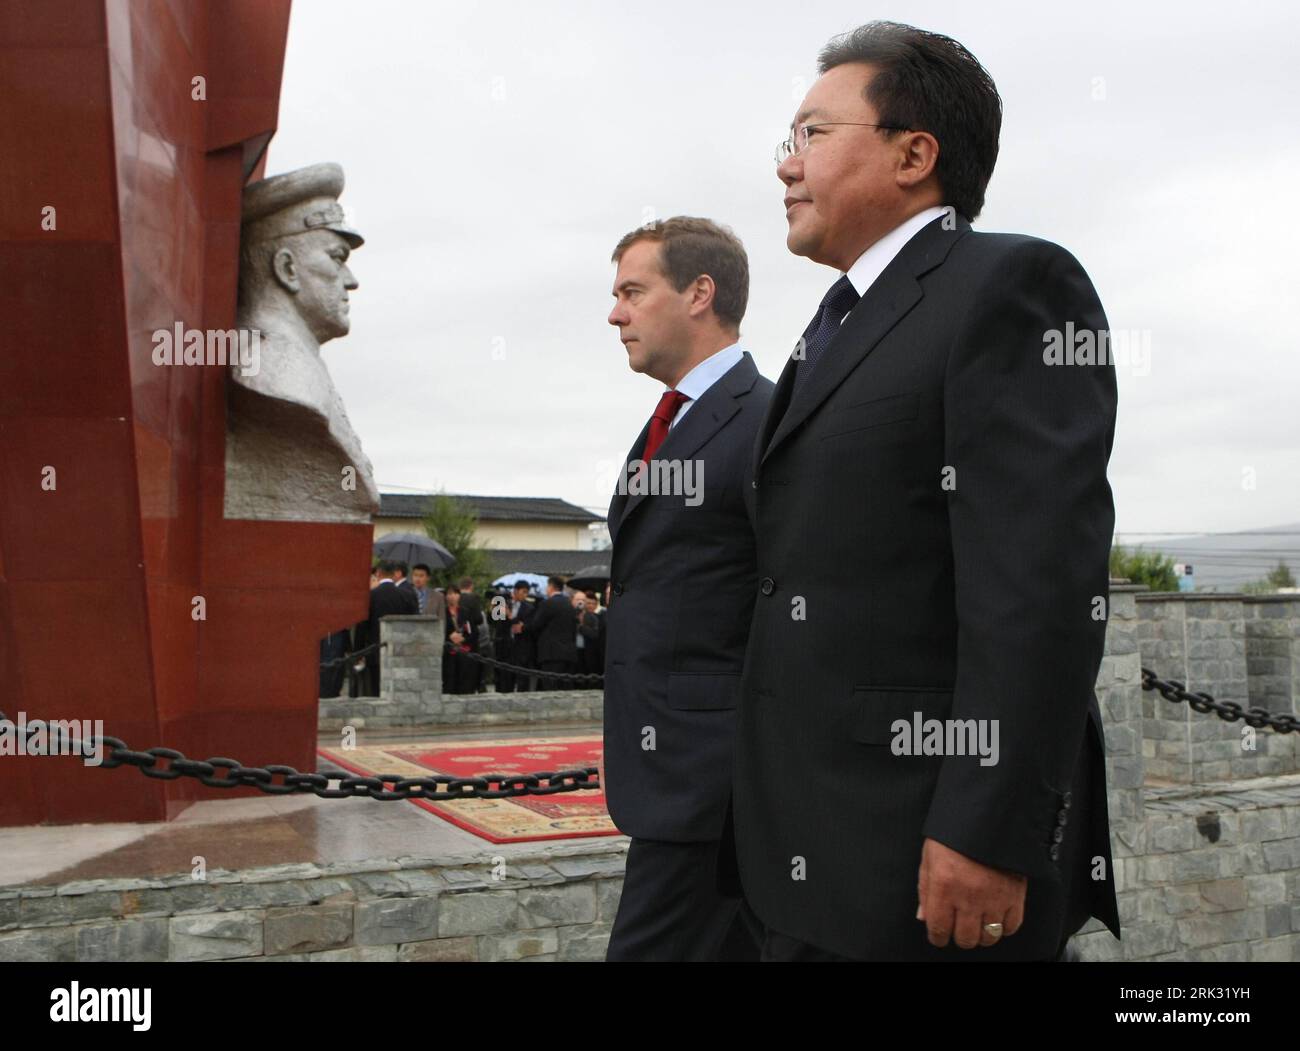 Bildnummer: 53289721  Datum: 26.08.2009  Copyright: imago/Xinhua (090826) -- ULAN BATOR, Aug. 26, 2009 (Xinhua) -- Russian President Dmitry Medvedev (L) and Mongolian President Tsakhiagiin Elbegdorj take part in a wreath laying ceremony at the monument of Marshal Georgy Zhukov in Ulan Bator, capital of Mongolia, Aug. 26, 2009. The ceremony was held to mark the 70th anniversary of the Nomonhan war.  (Xinhua/Hao Lifeng) (msq) (2)MONGOLIA-RUSSIA-ZHUKOV PUBLICATIONxNOTxINxCHN People Politik kbdig xcb 2009 quer o0 Russland    Bildnummer 53289721 Date 26 08 2009 Copyright Imago XINHUA 090826 Ulan Ba Stock Photo